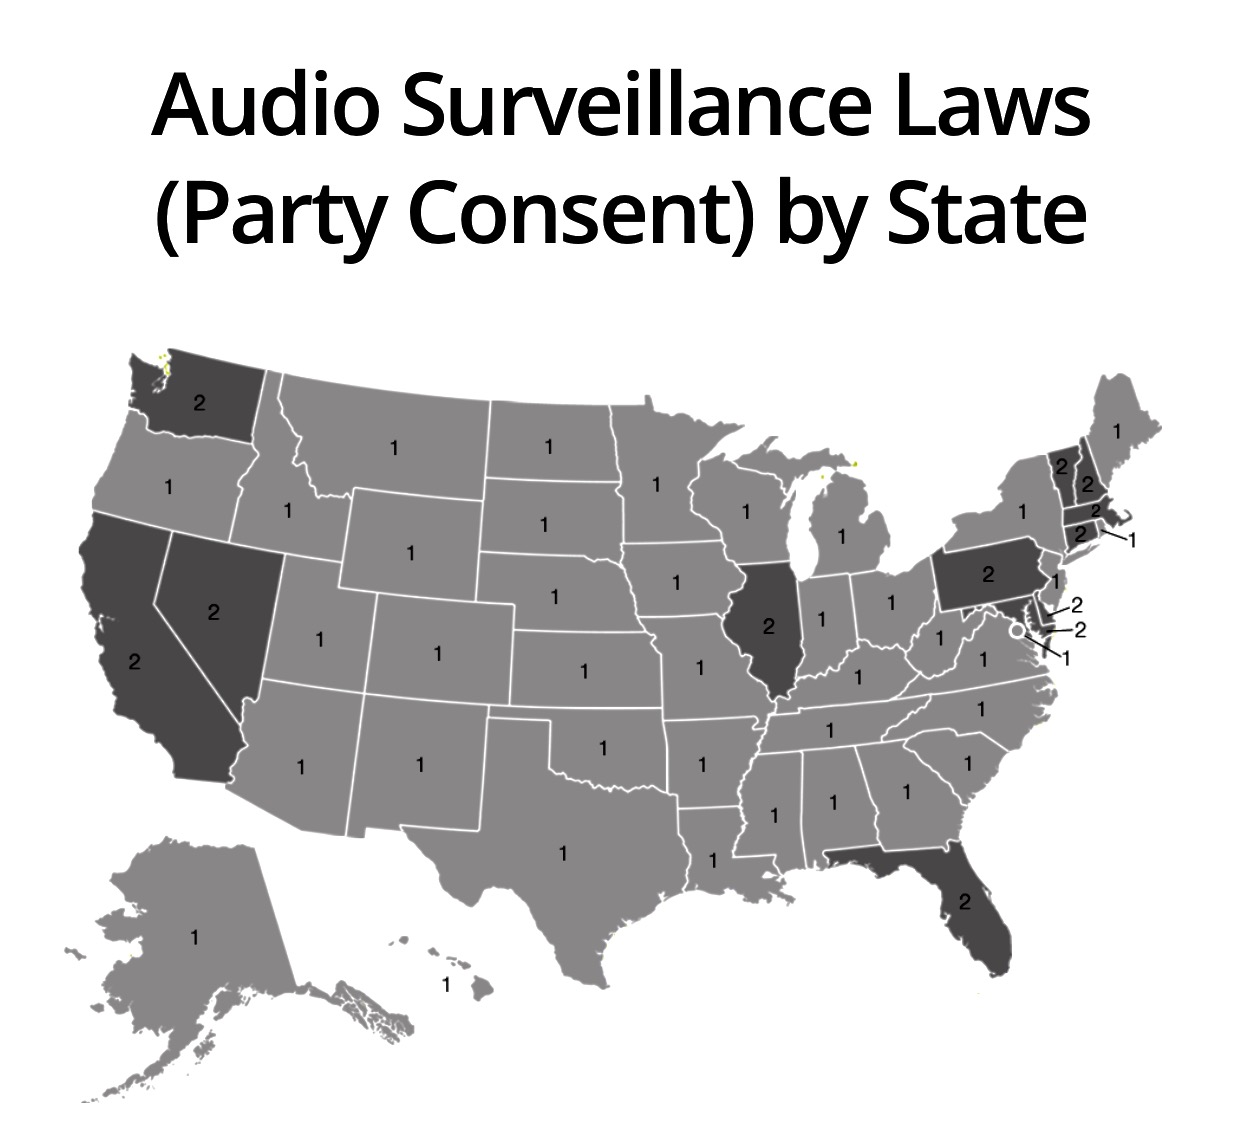 Audio Surveillance laws by state